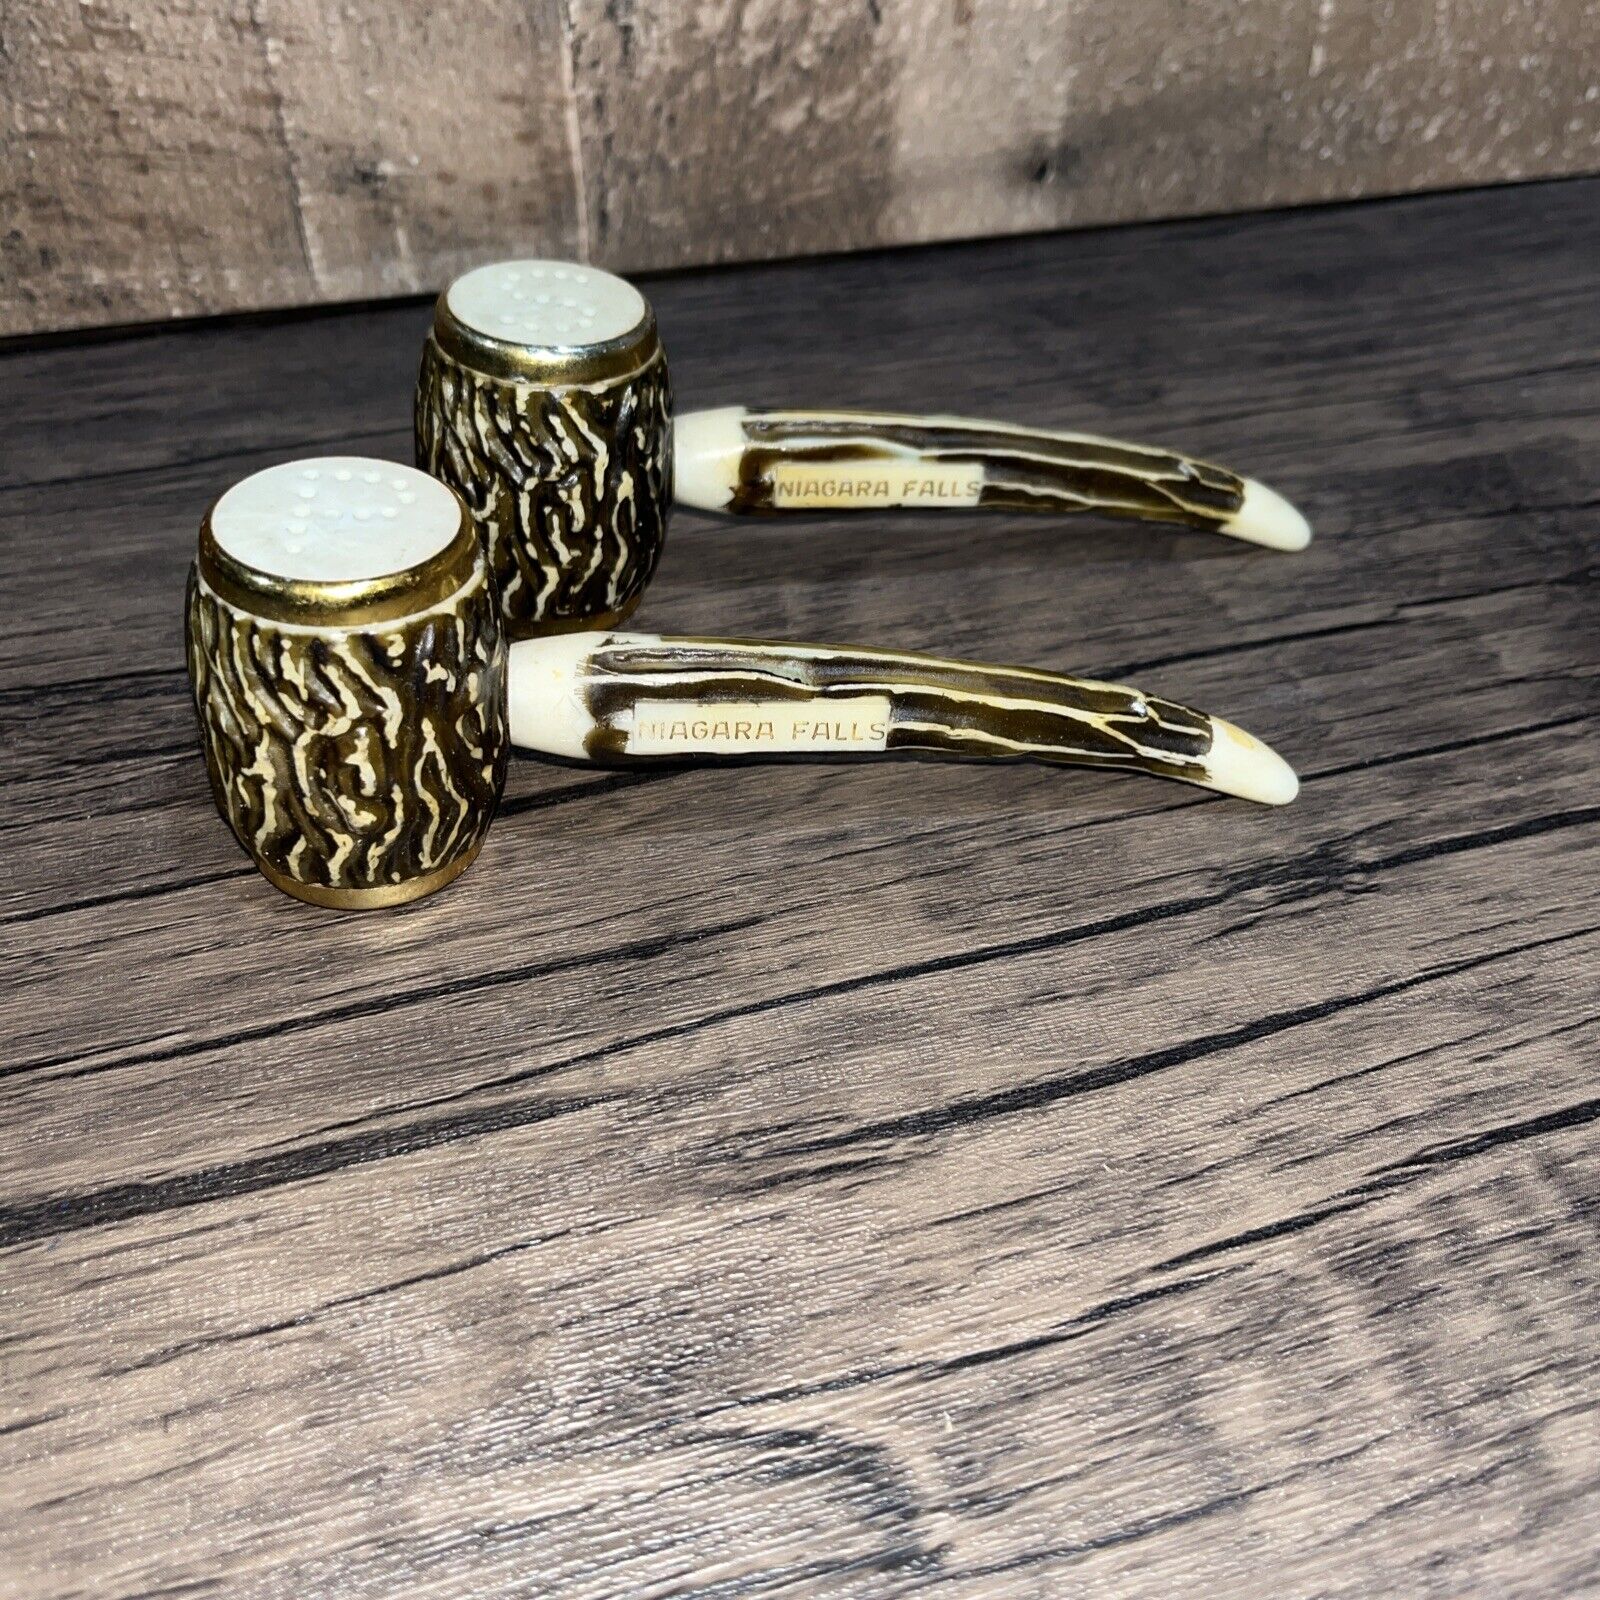 Vintage Faux Wood Pipes Plastic Salt Pepper Shakers From Niagara Falls